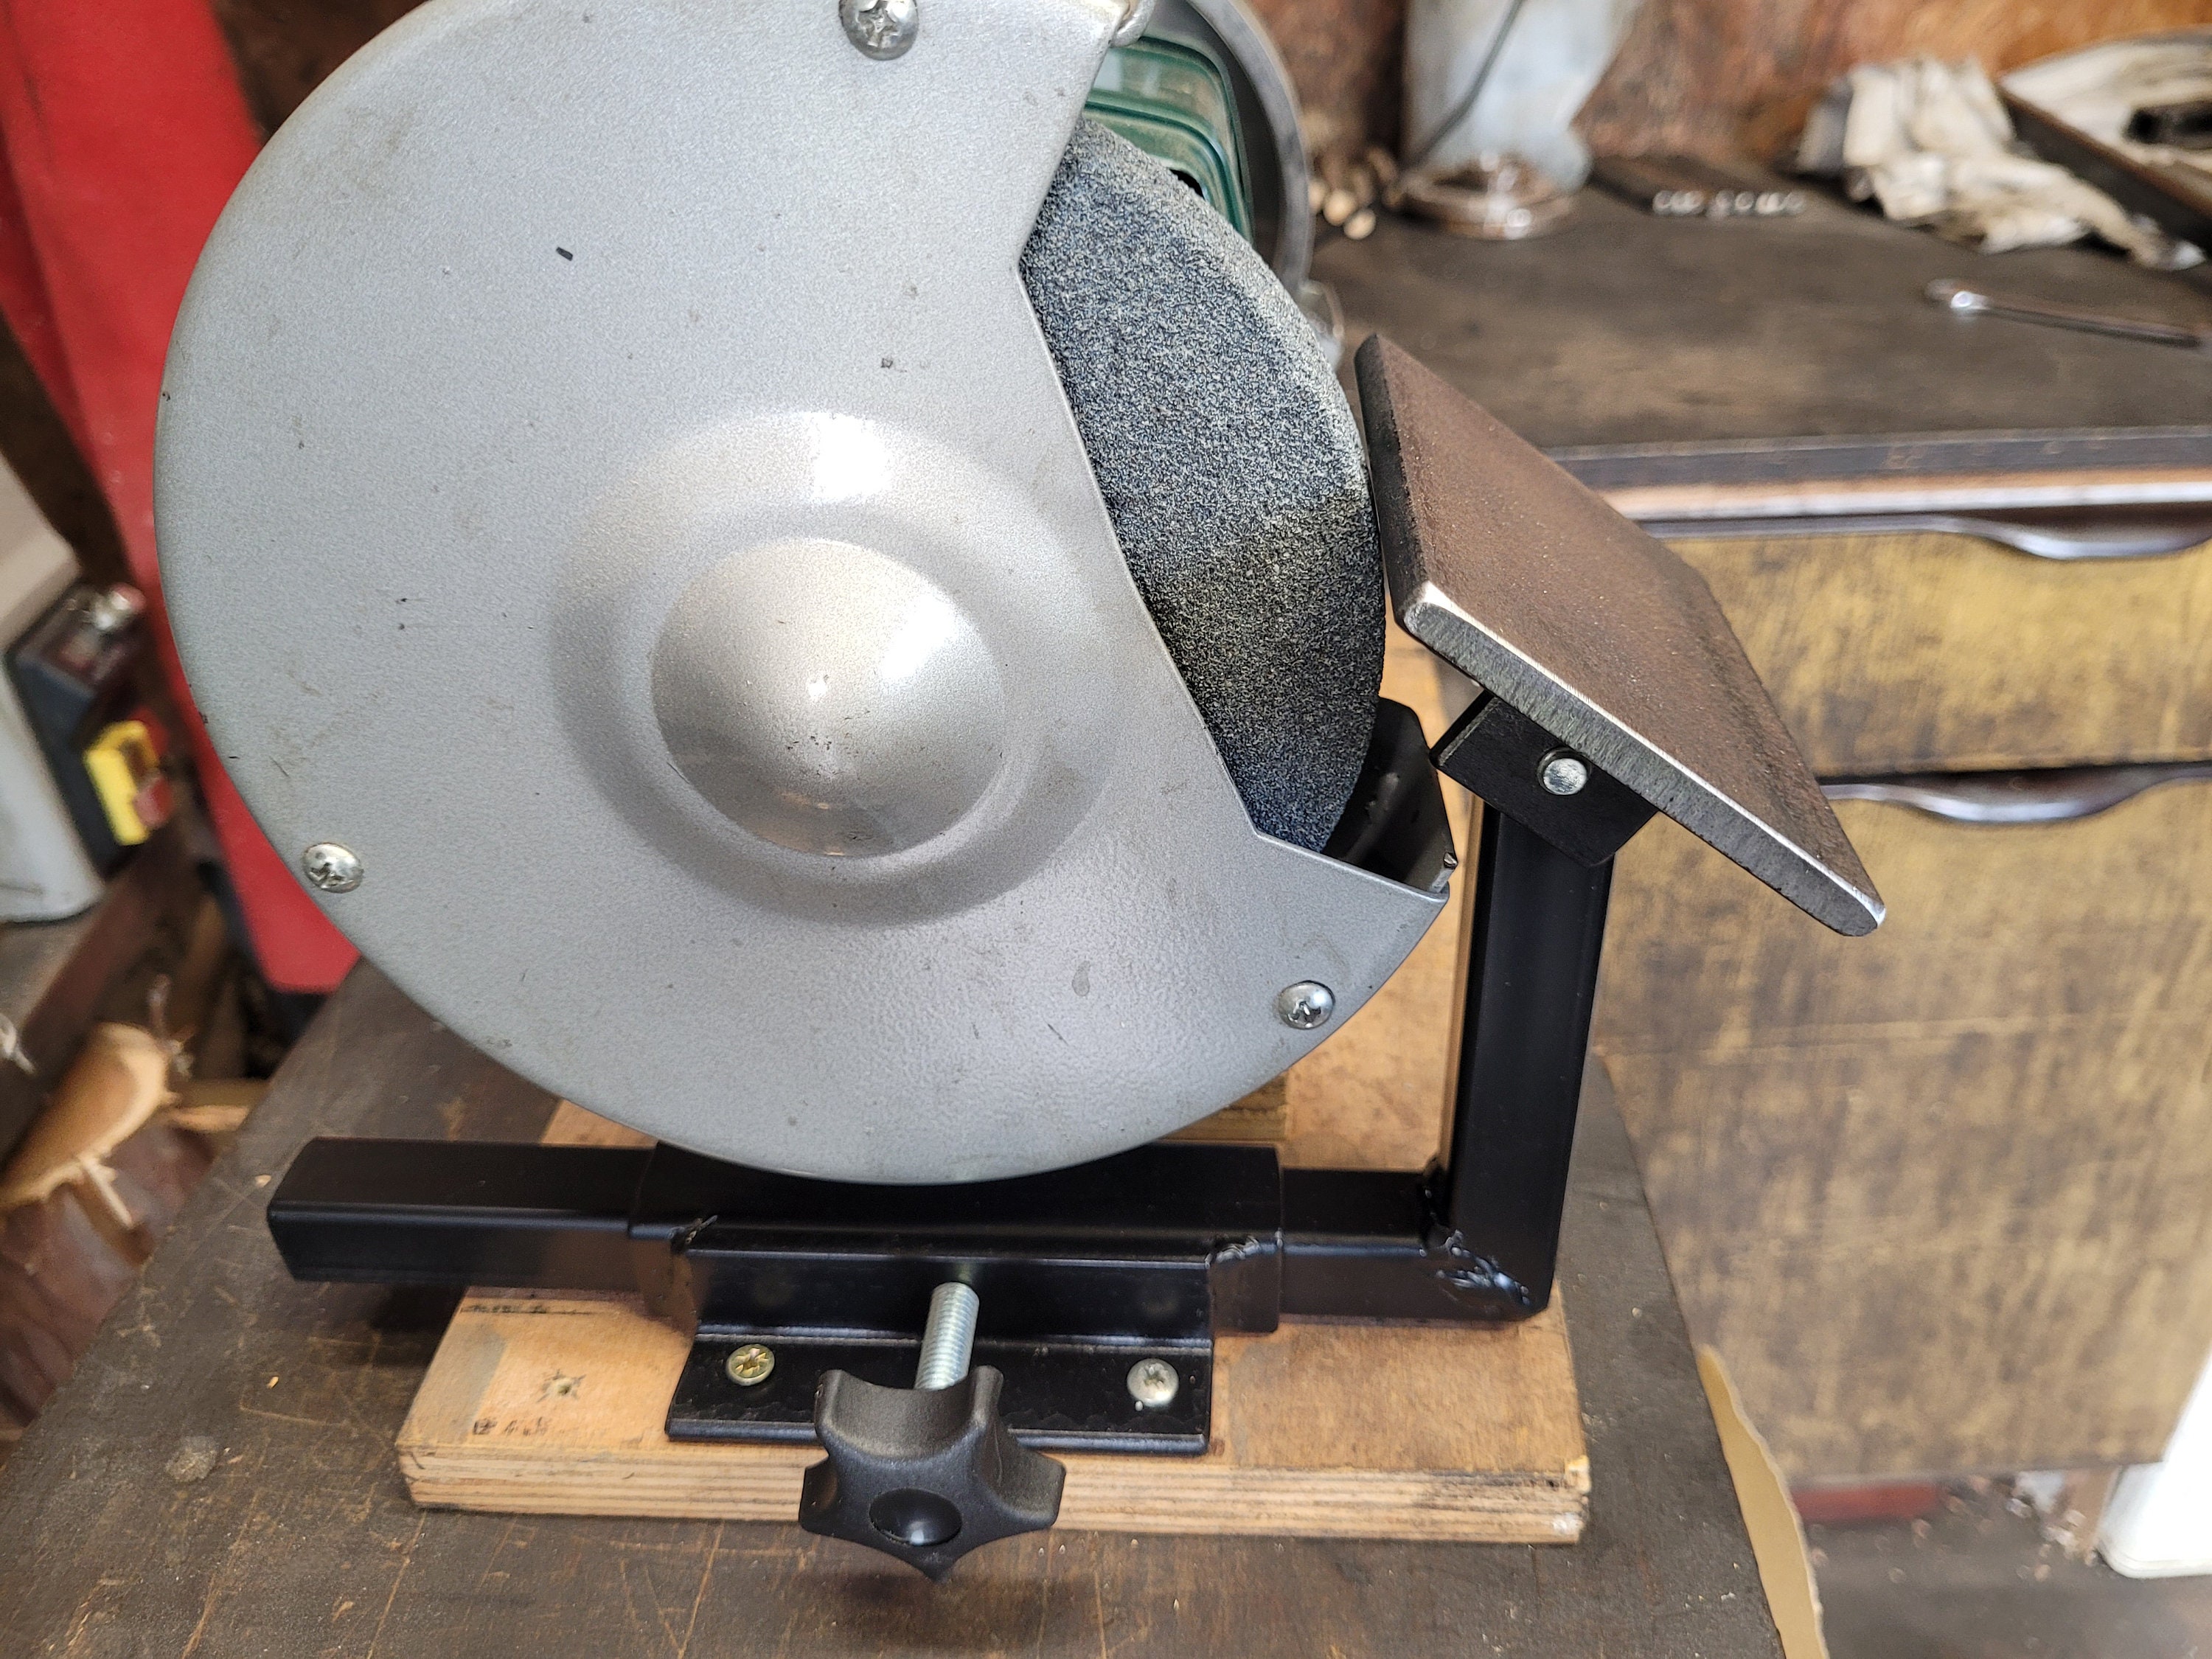 Bench Grinder Replacement Sharpening Tool Rest Jig for 6 and 8 Grinders and BG